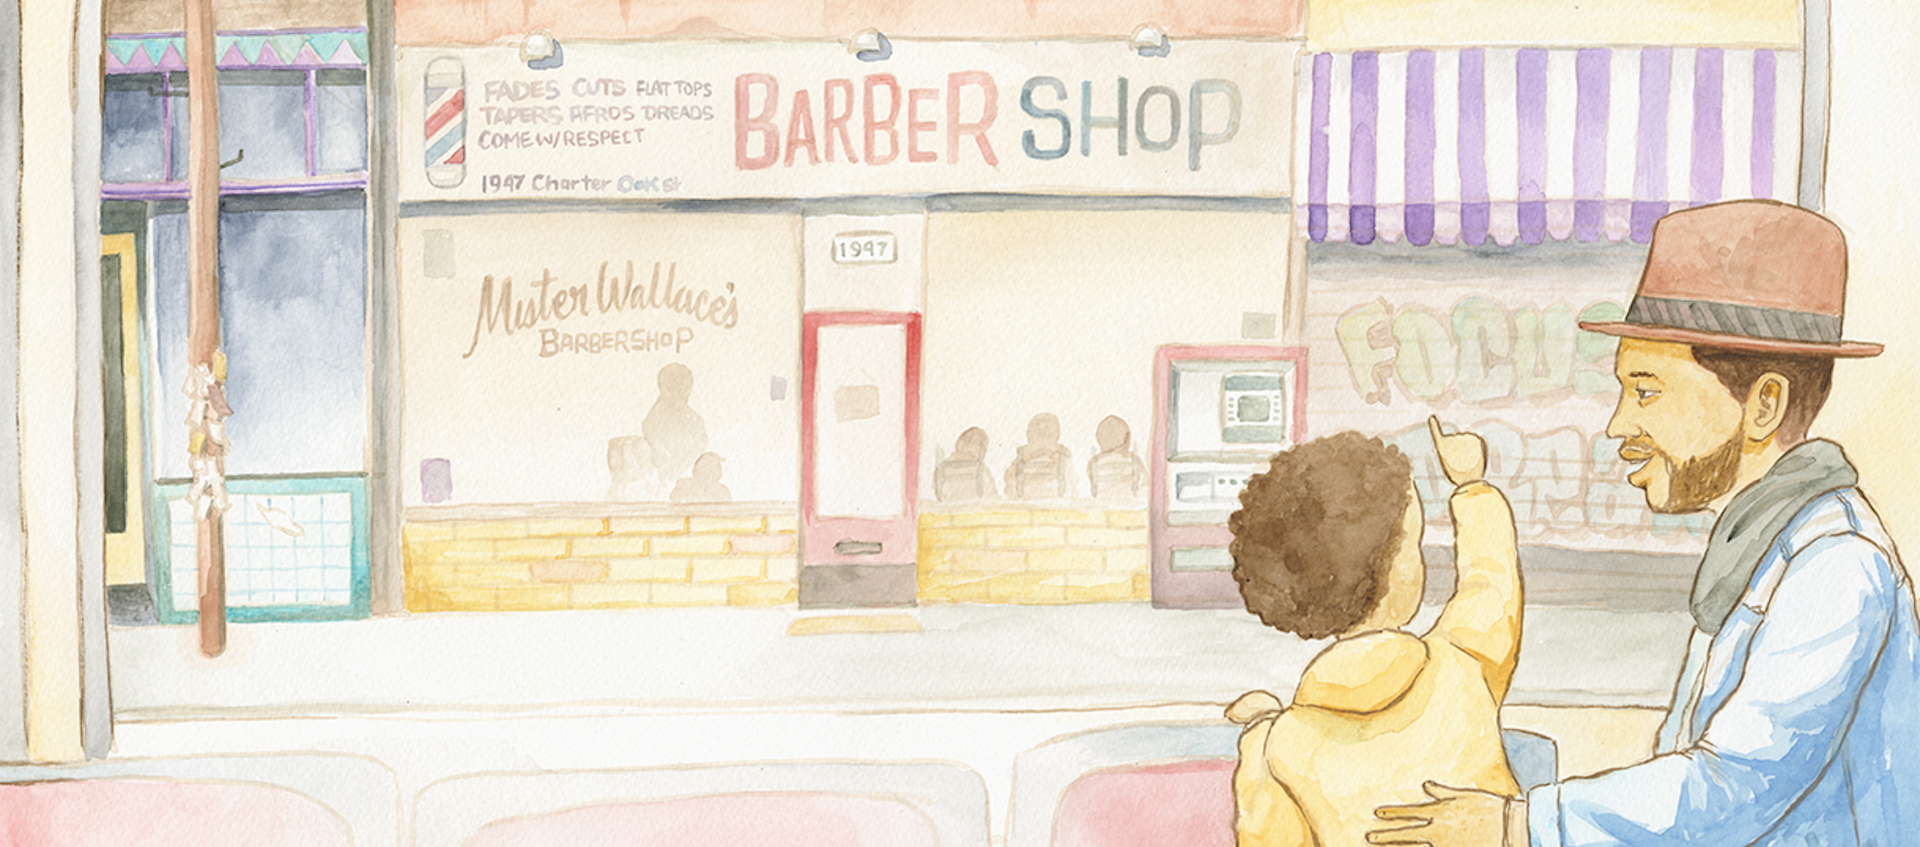 A young boy of color and his father stand in front of a barbershop in an illustration from Robert Liu Trujillo's book Furqan's First Flat Top